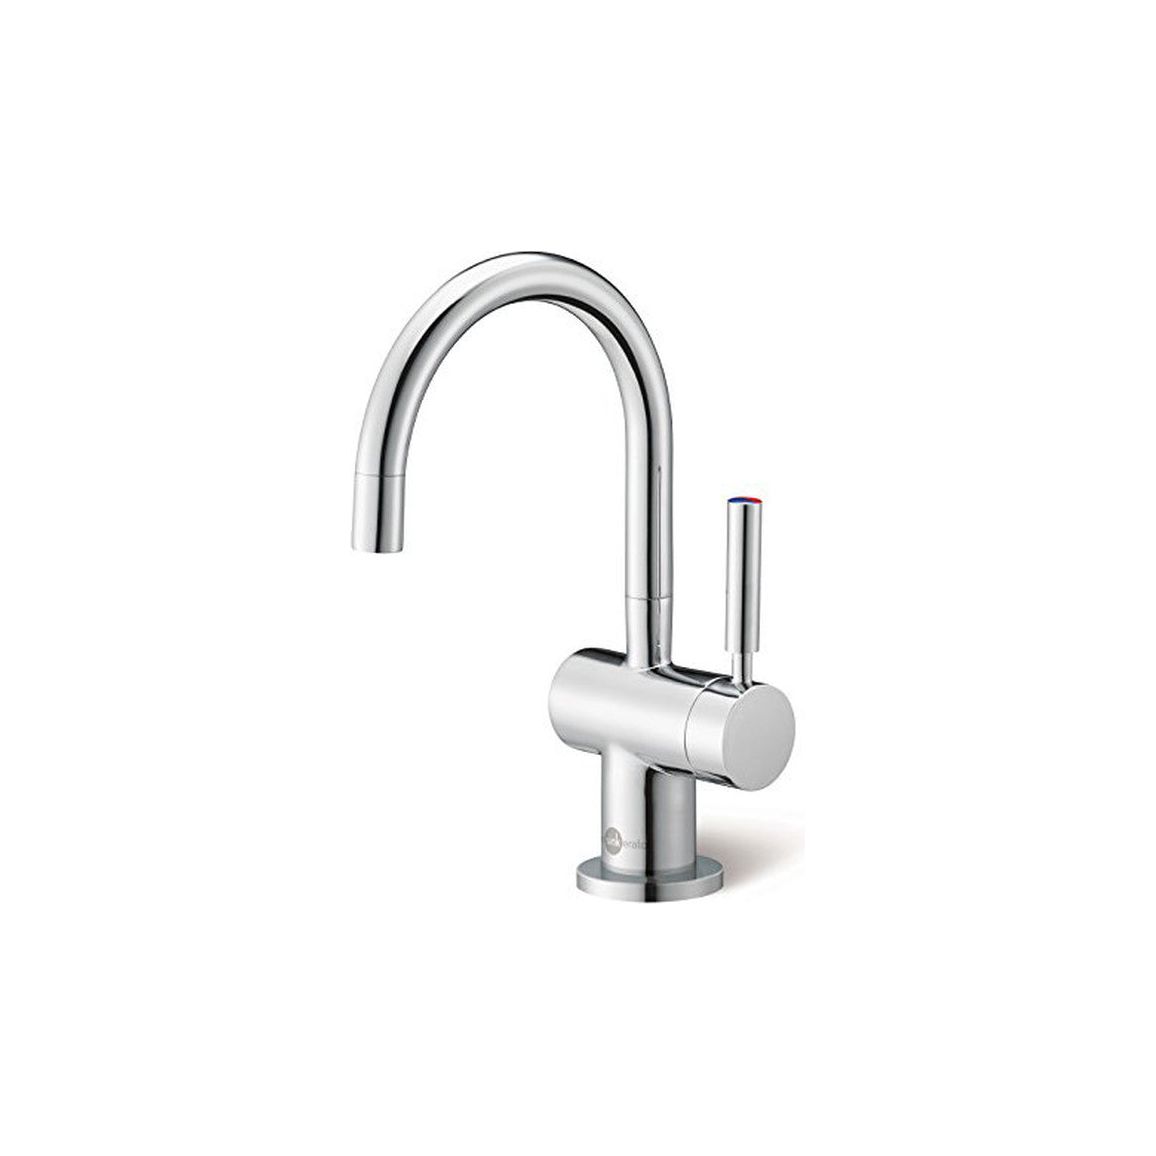 InSinkErator HC3300 Hot/Cold Water Mixer Tap Only - Chrome